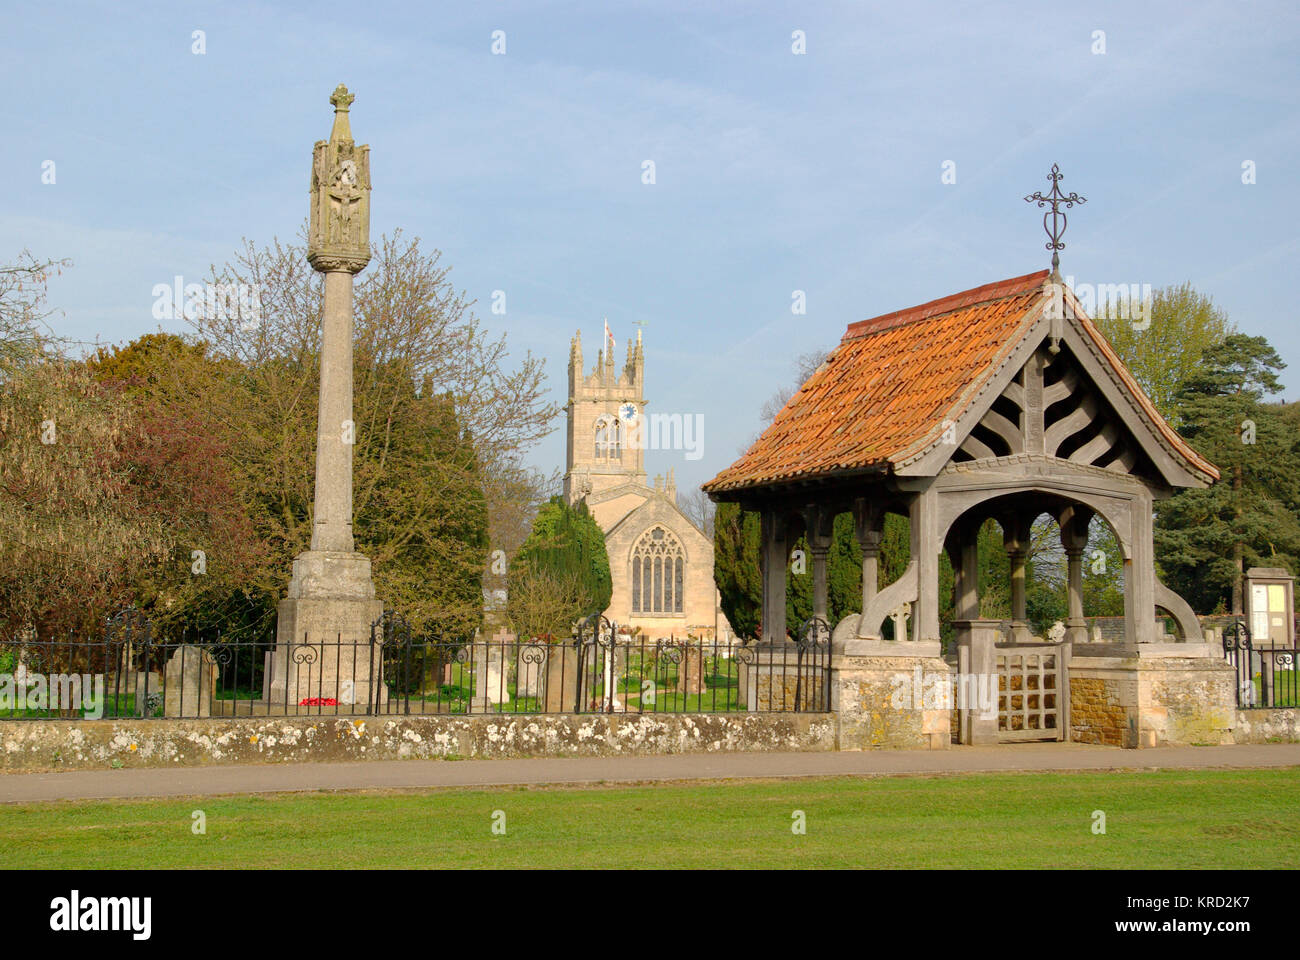 View of St Nicholas' Church, Fulbeck, Lincolnshire, seen from across the churchyard, with a stone cross and a lych gate in the foreground. Stock Photo